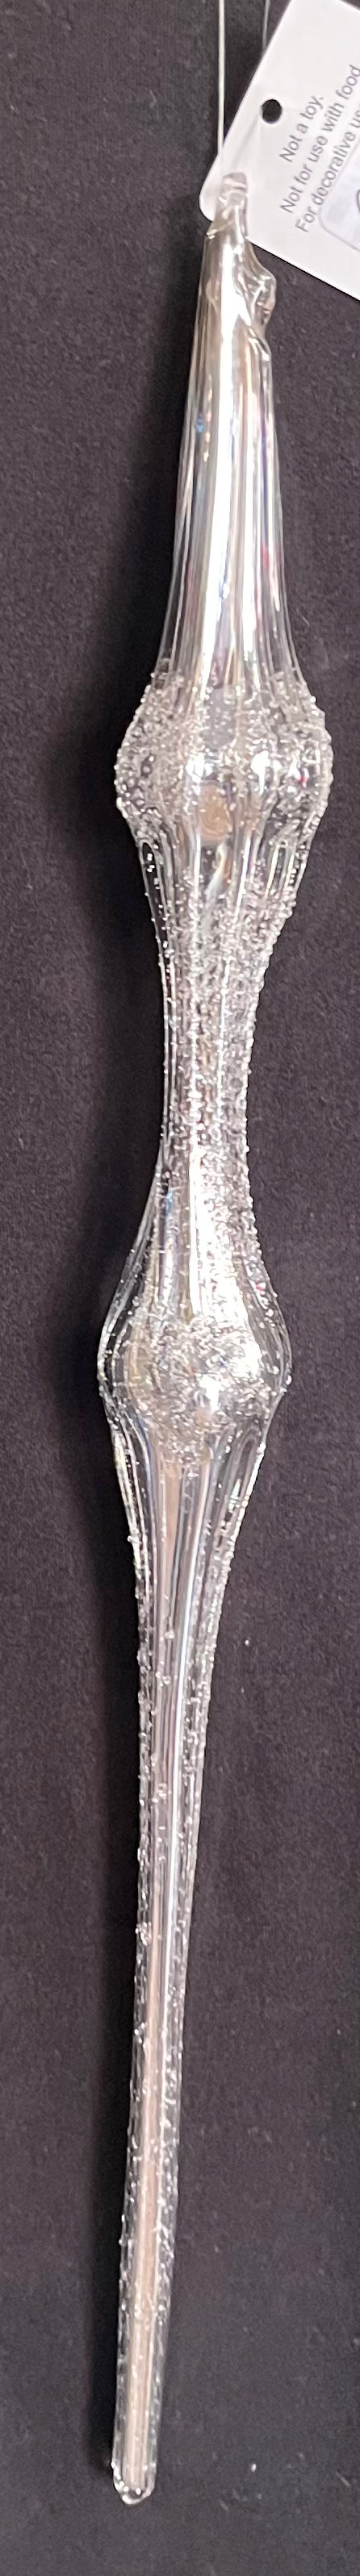 Icicle Ornaments